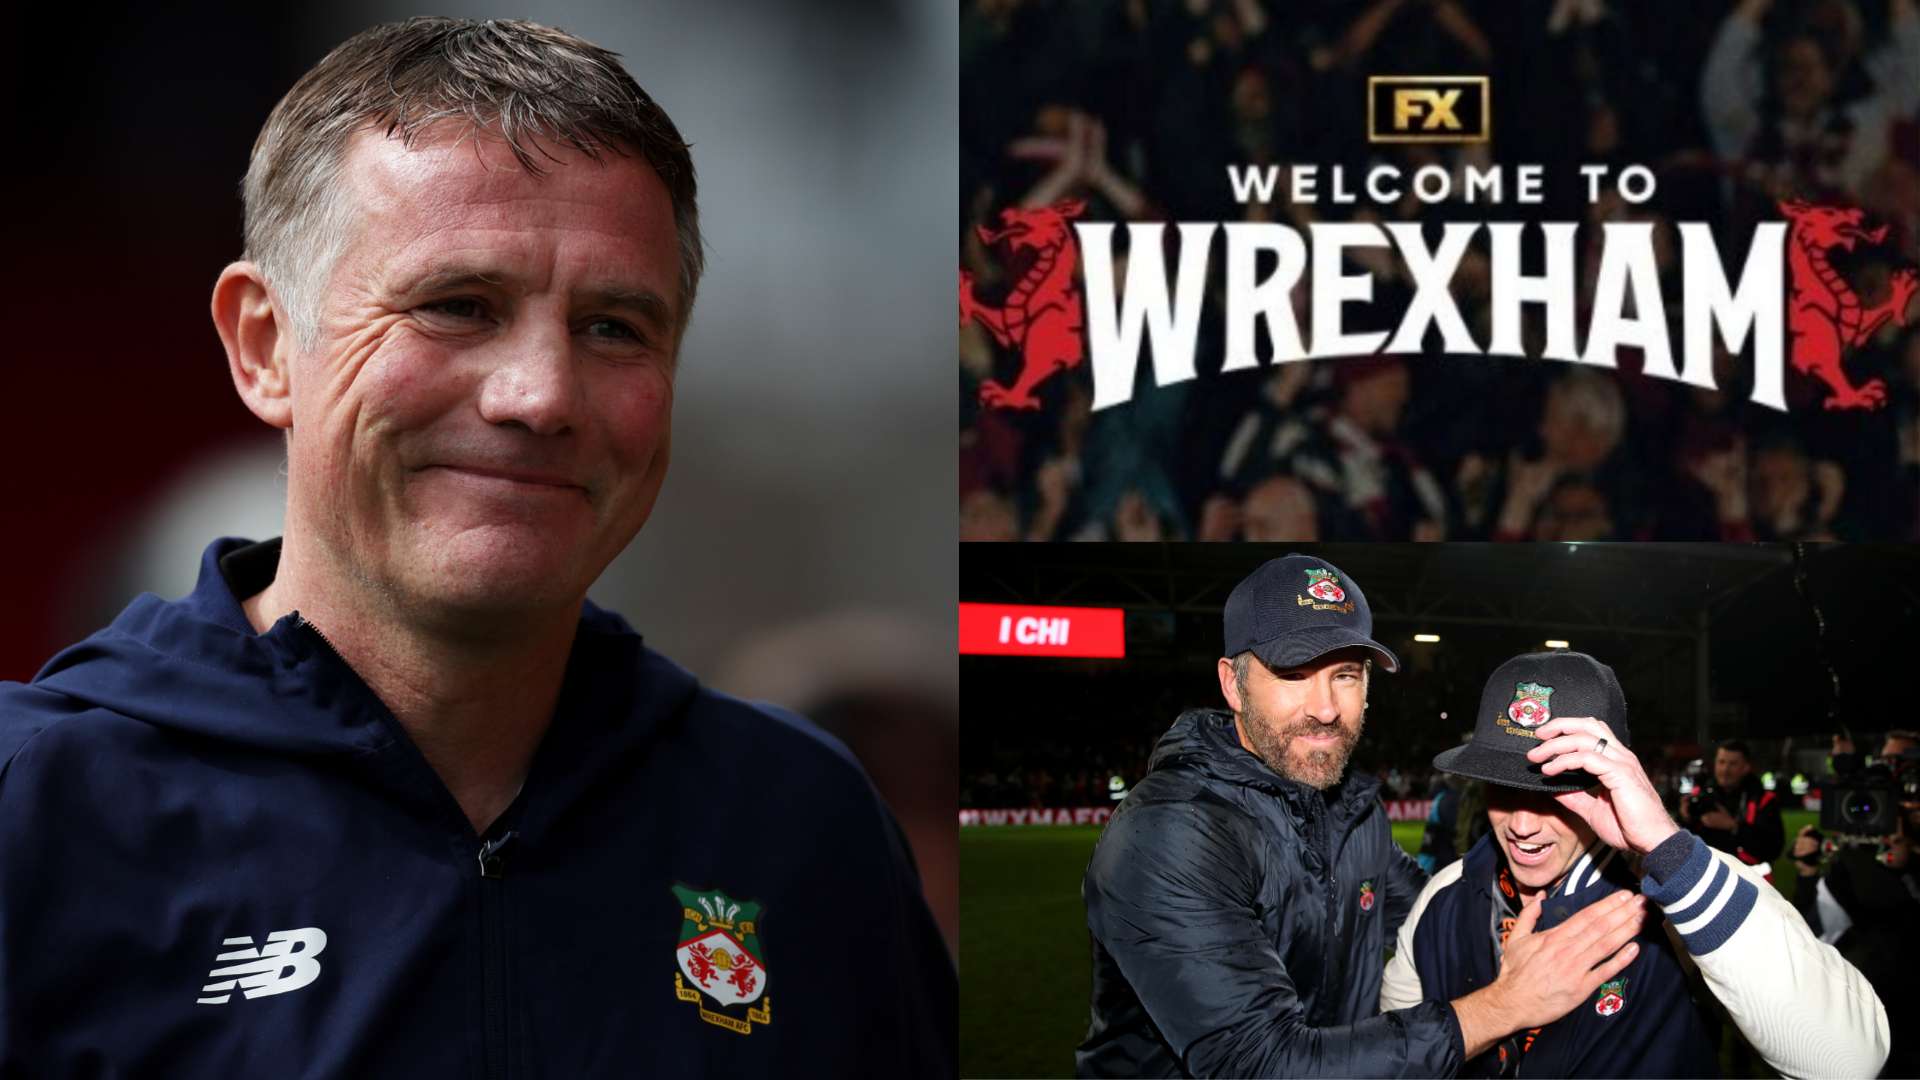 Phil Parkinson Welcome to Wrexham